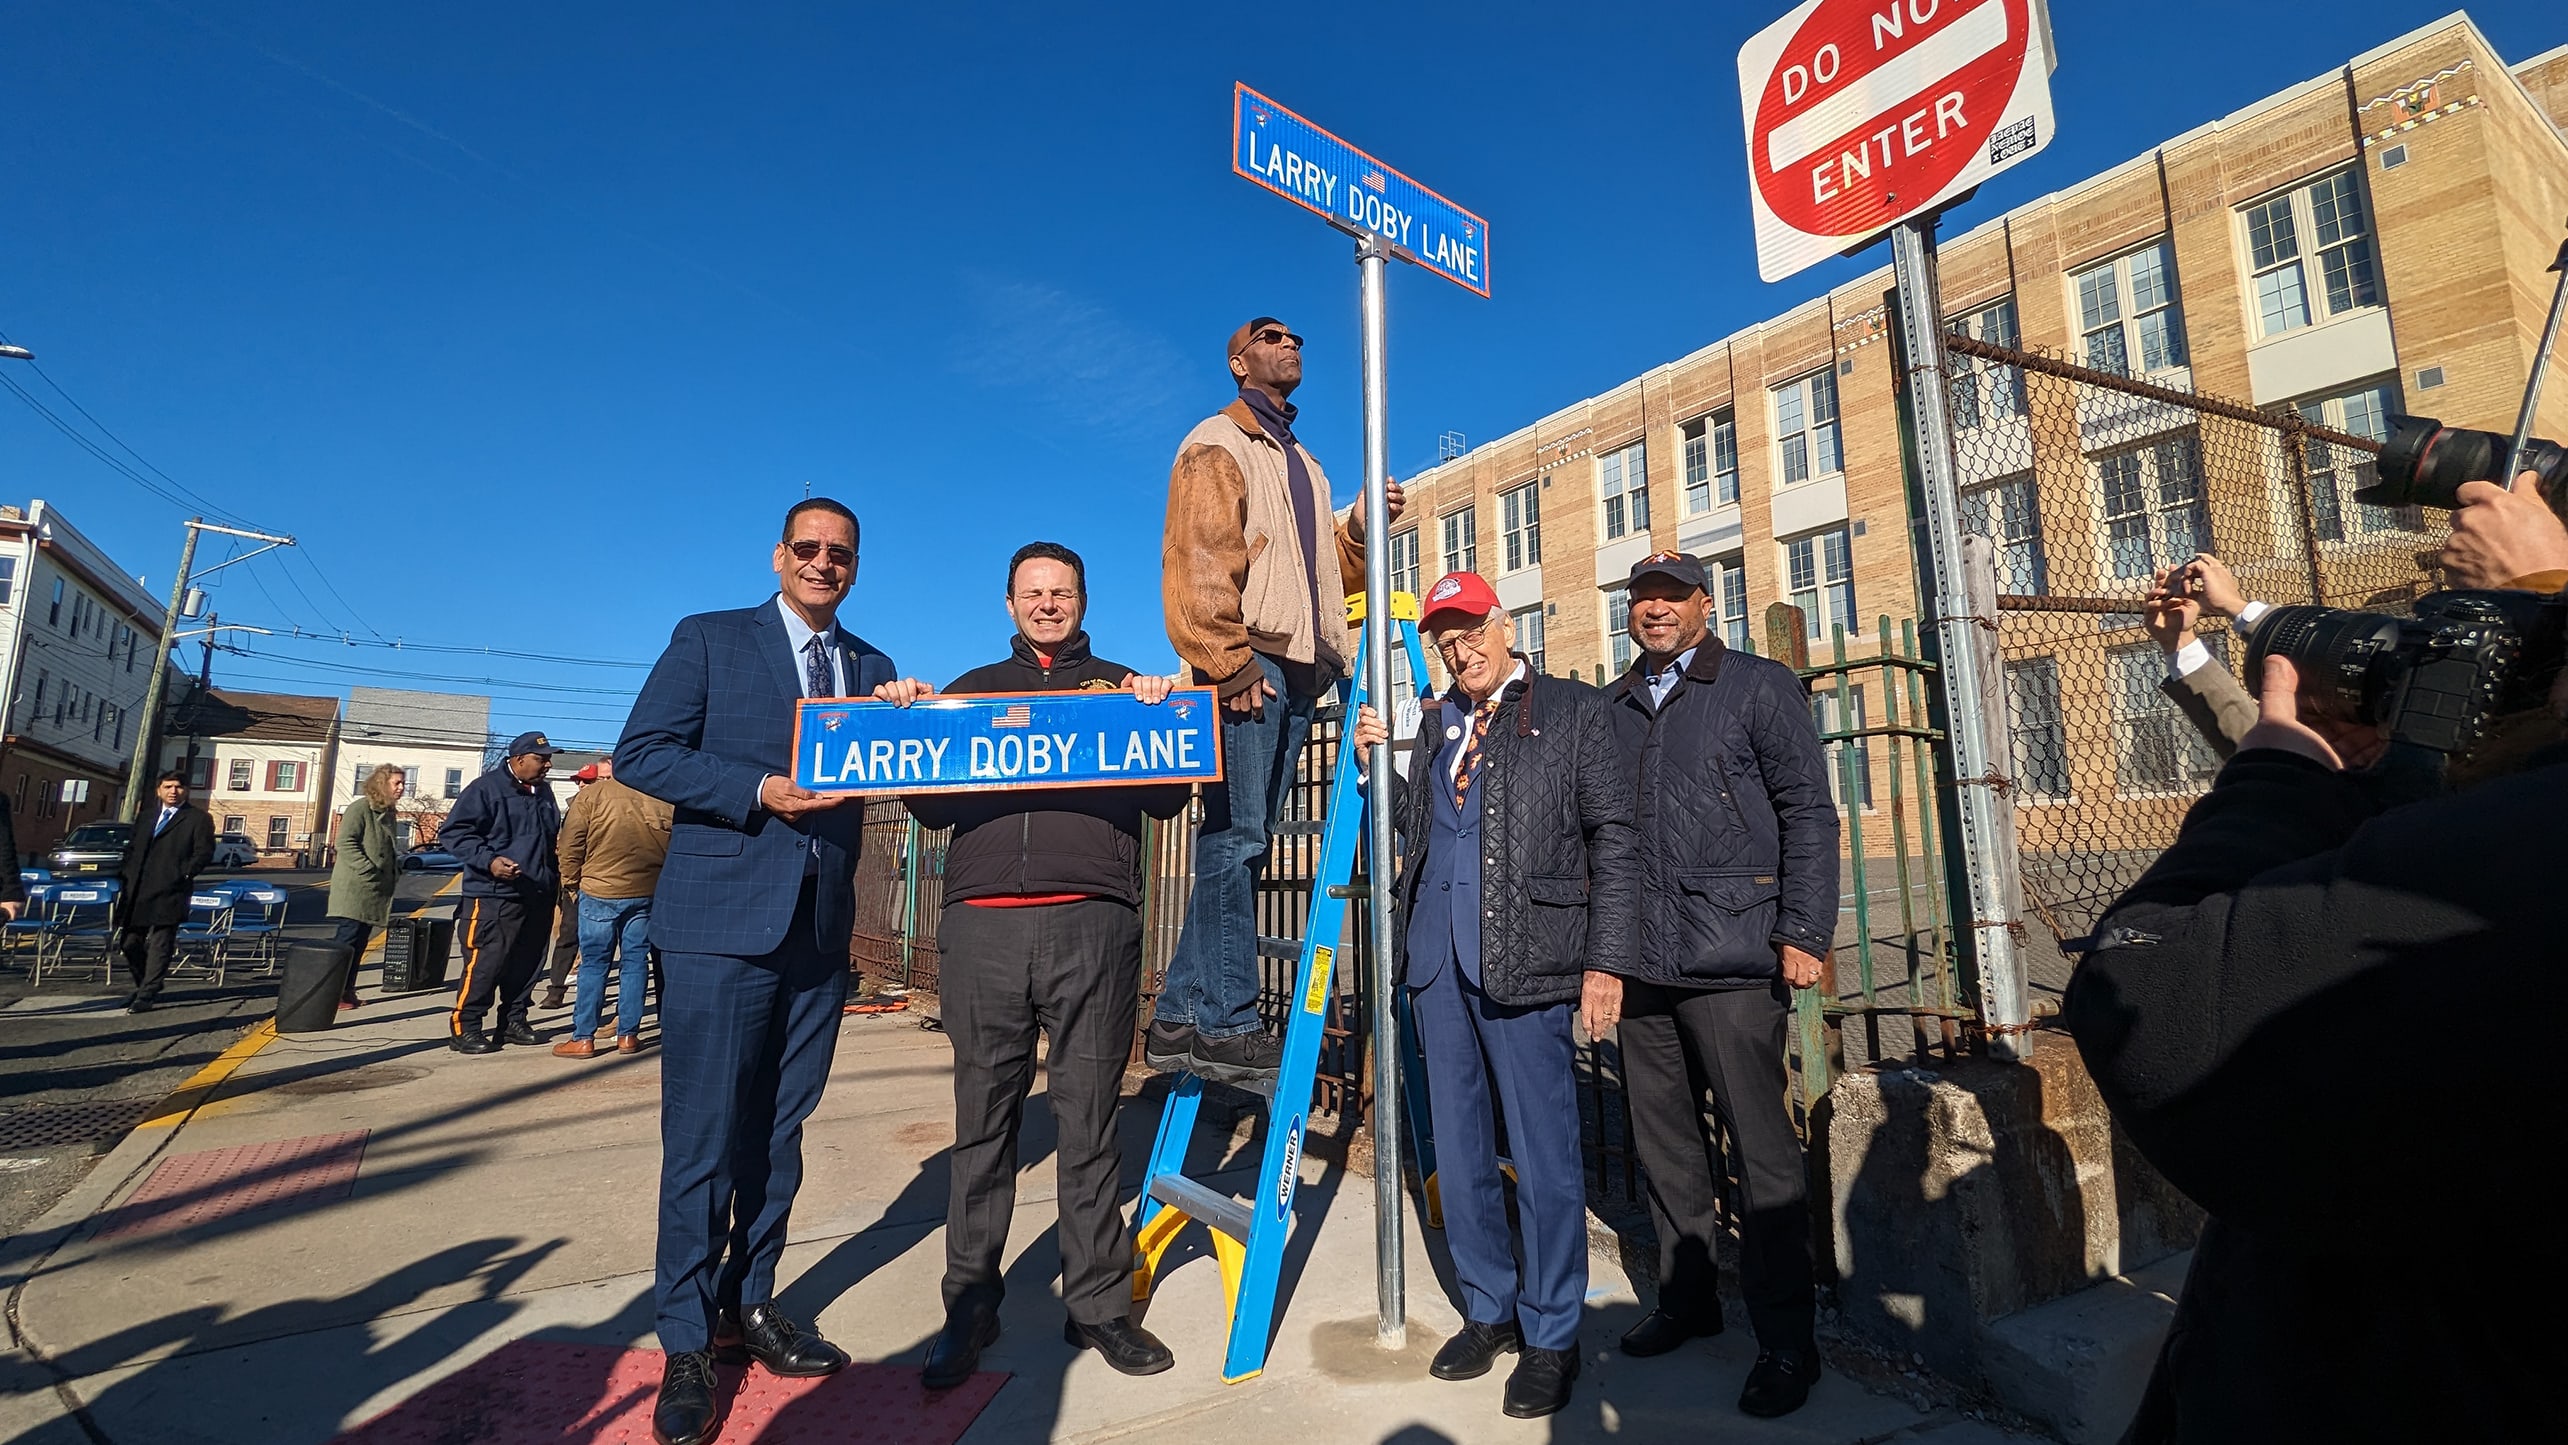 Five men pose beneath a street sign at Larry Doby Lane